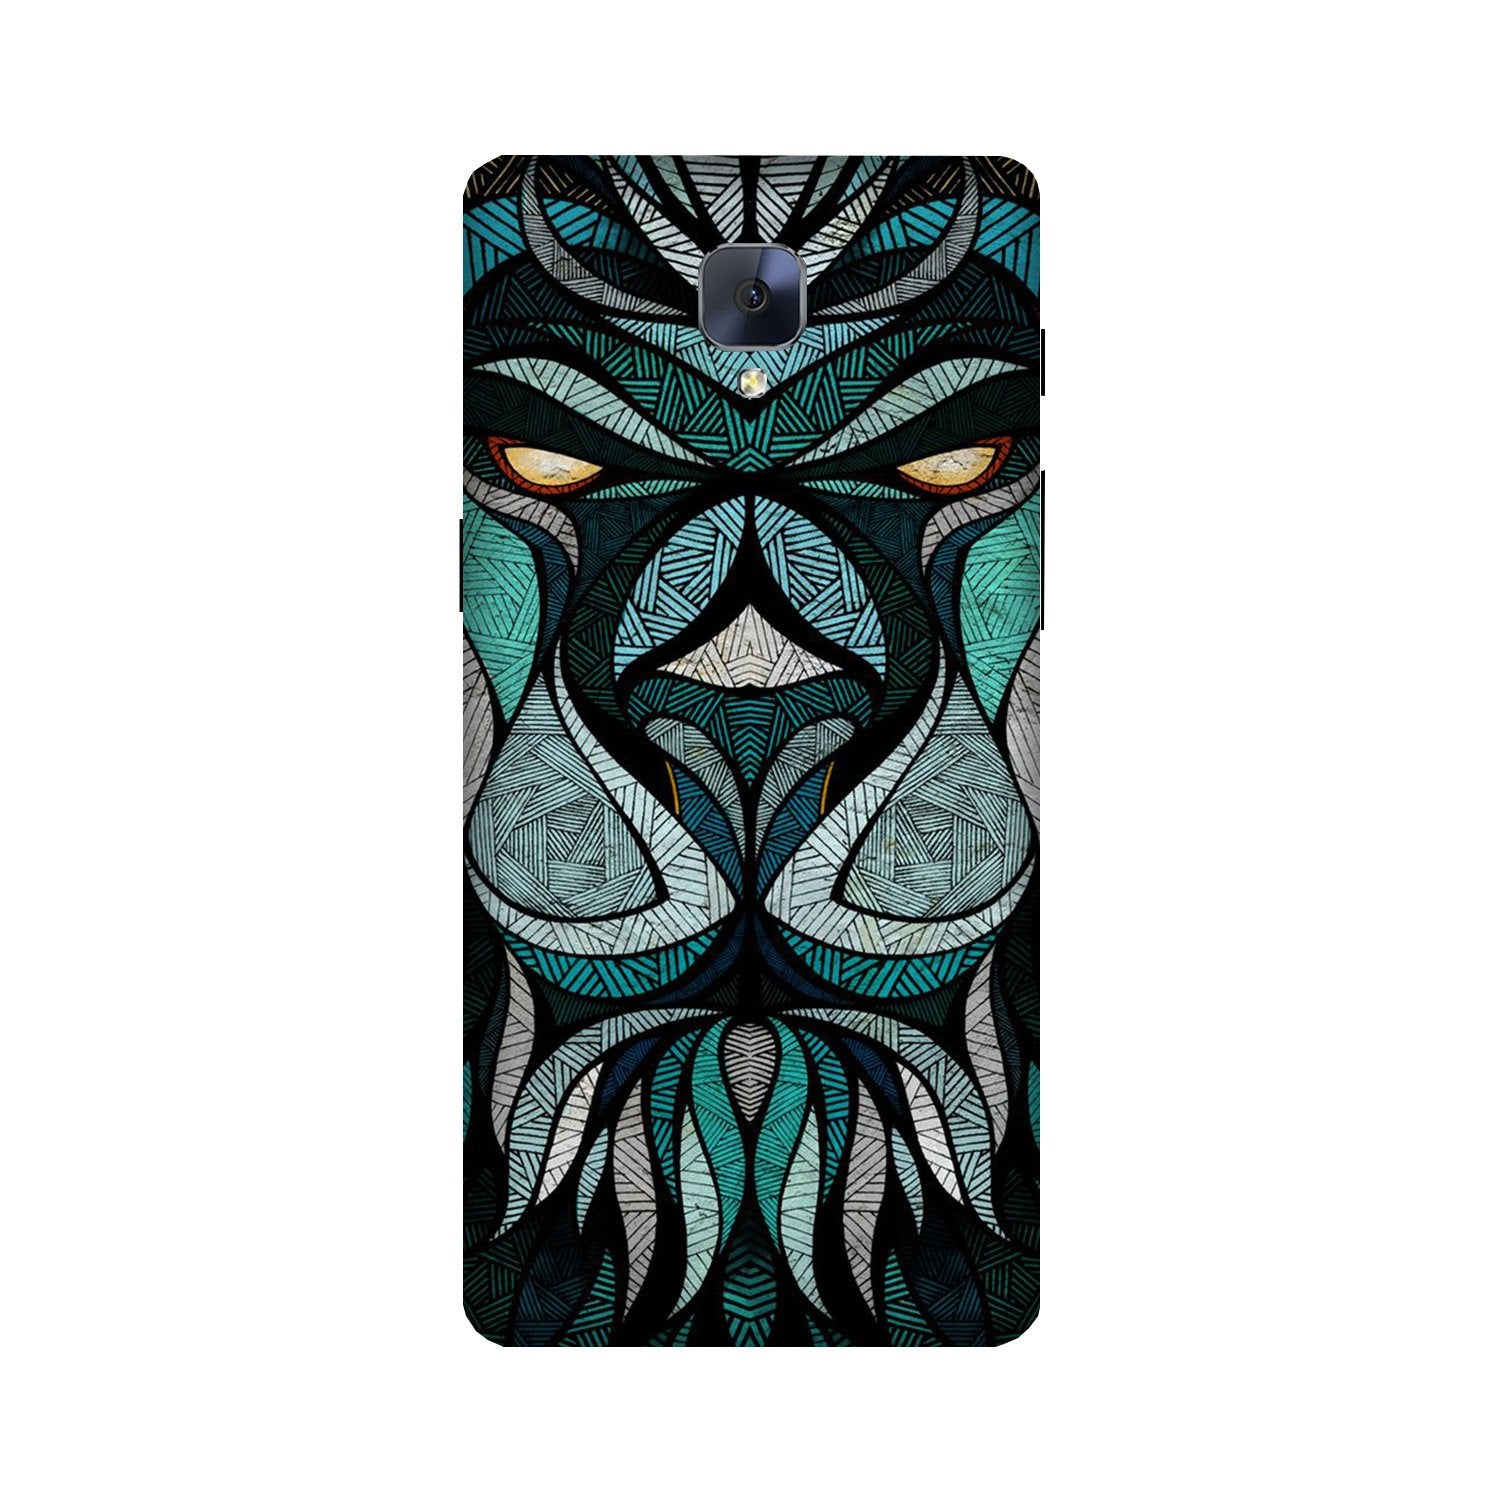 Lion Case for OnePlus 3/ 3T